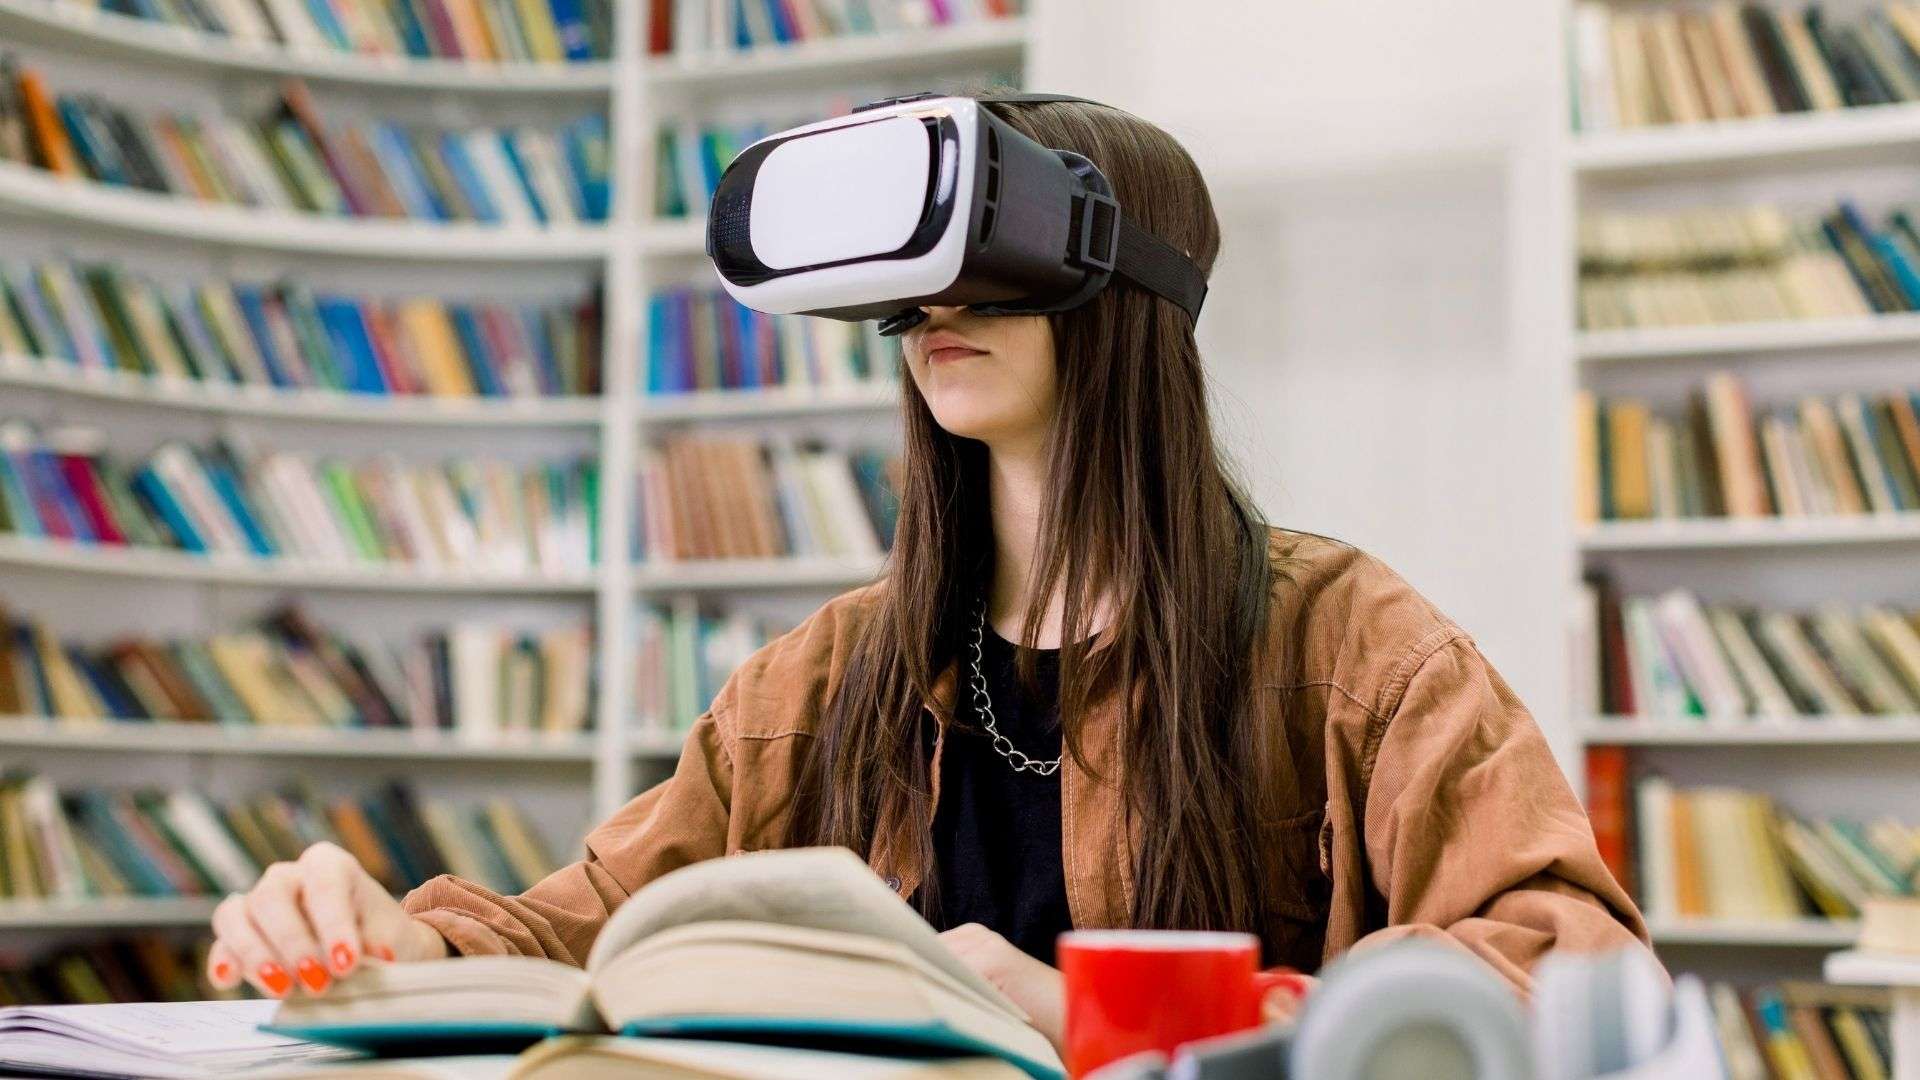 Vr and ar in education